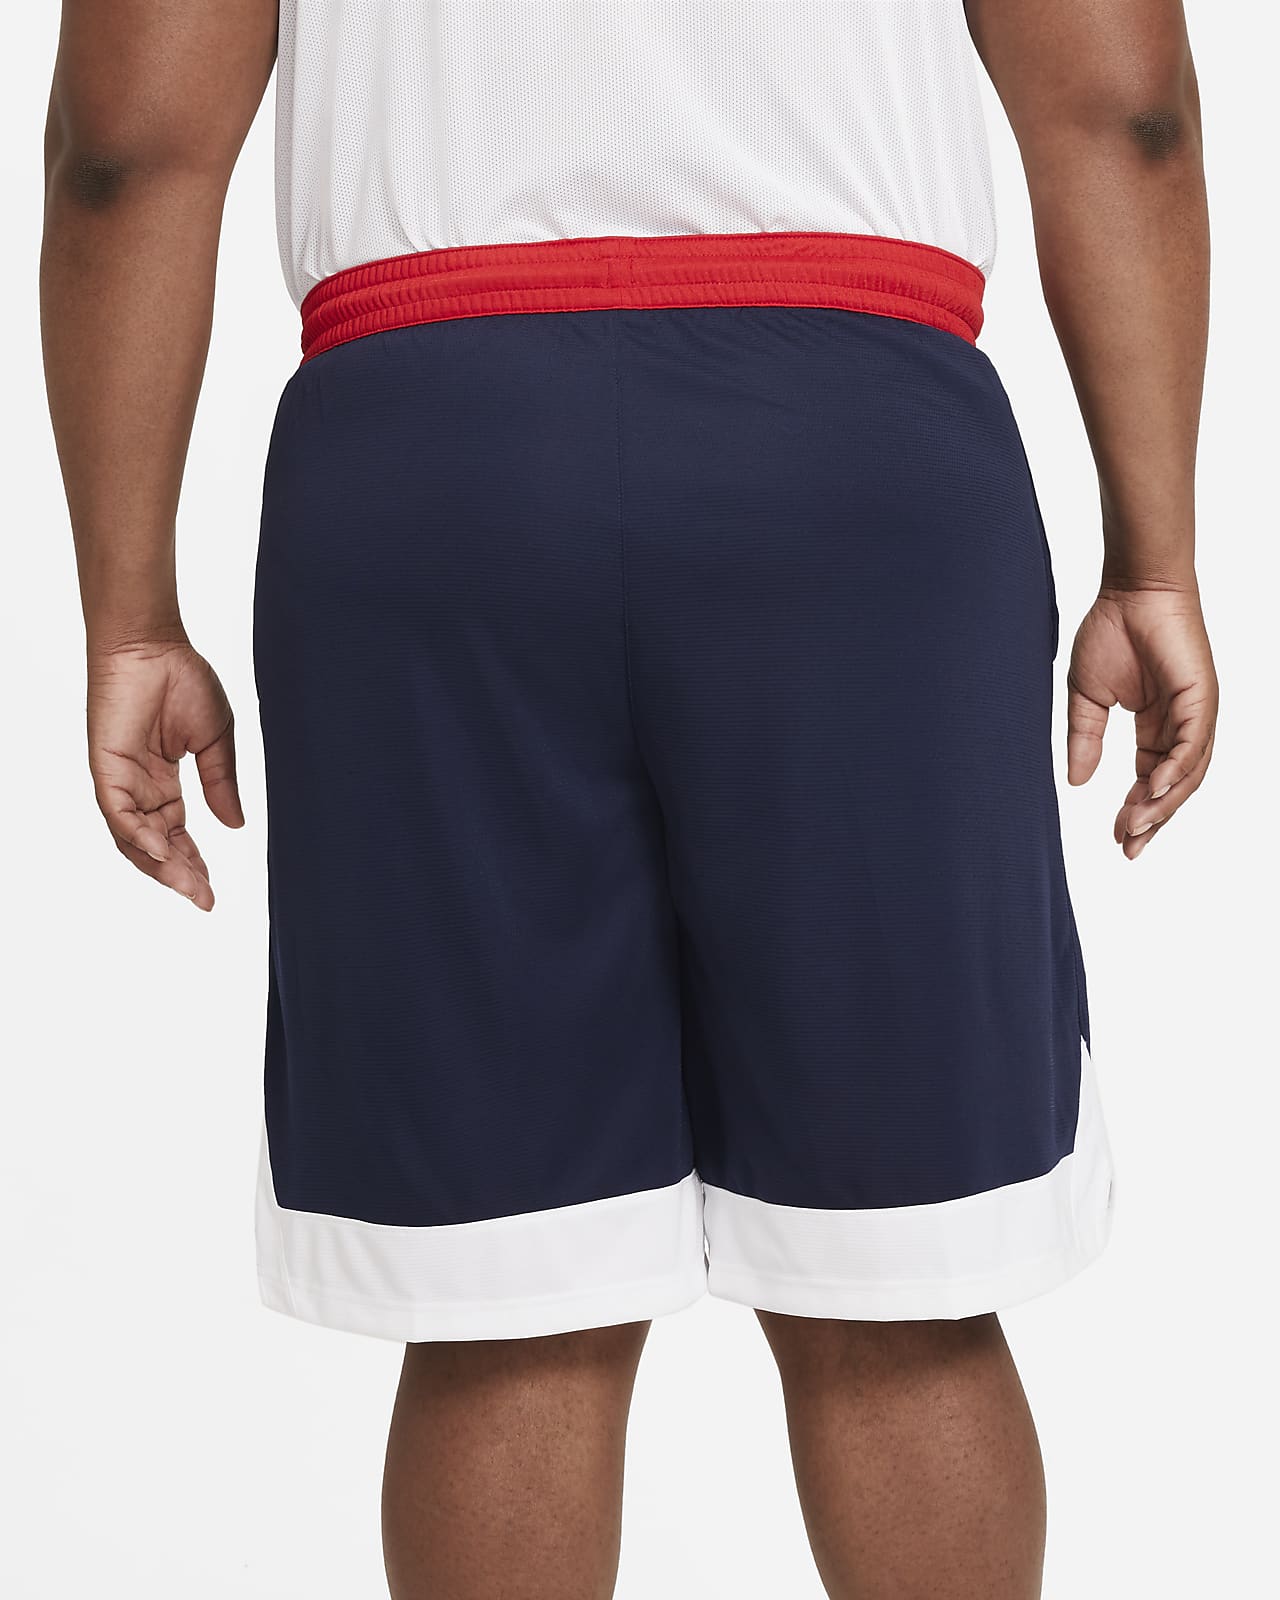 blue red and white nike shorts